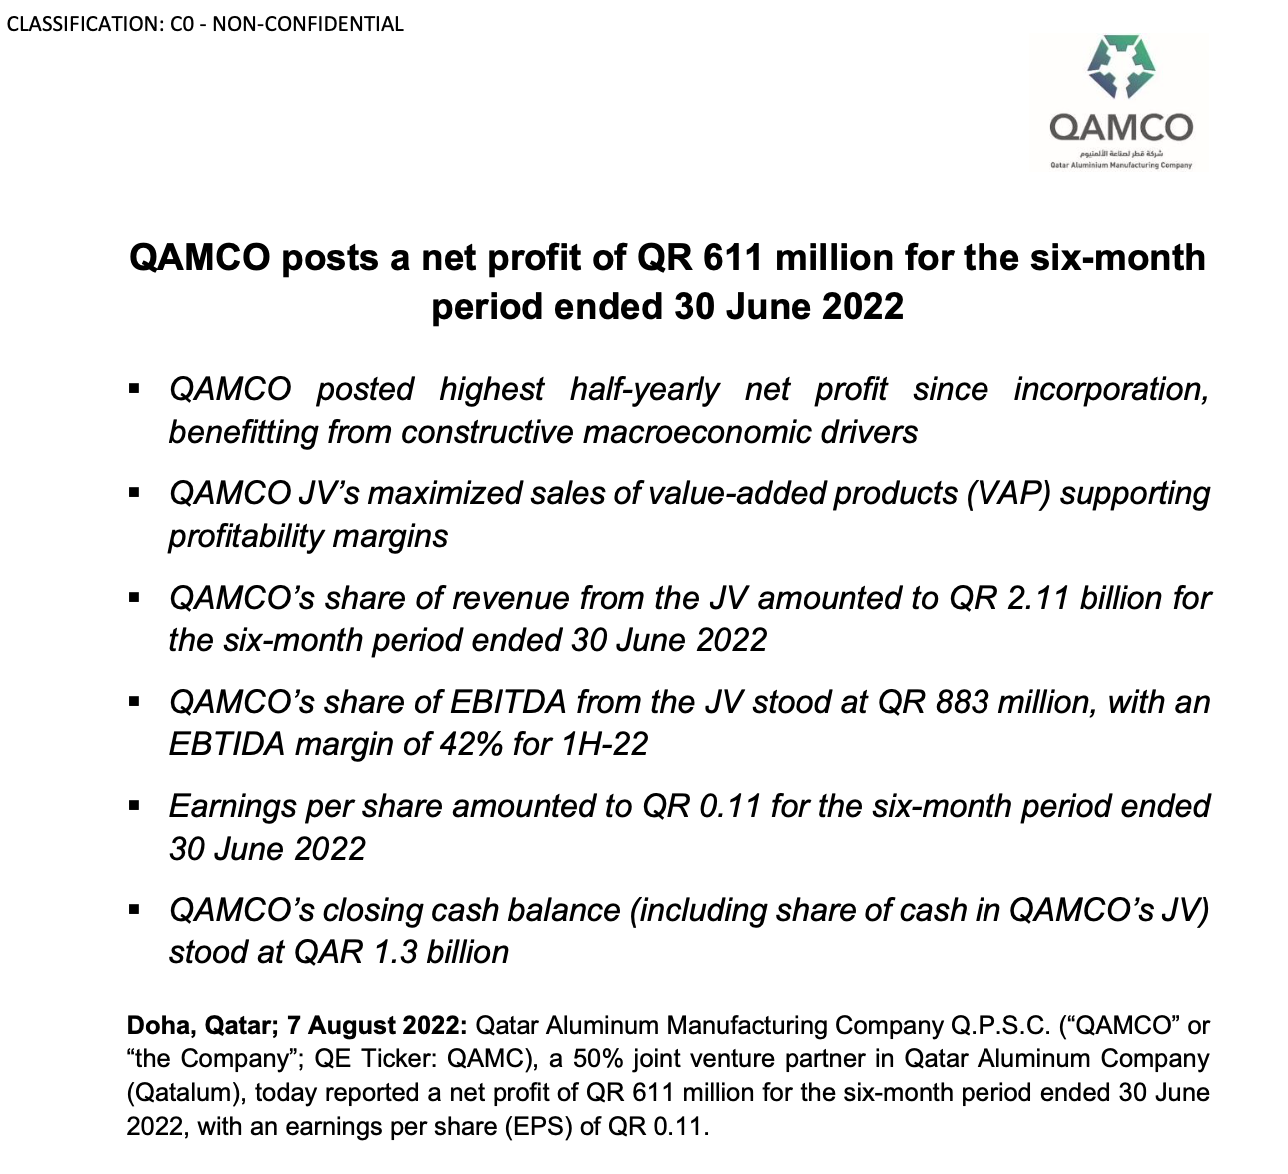 QAMCO posts a net profit of QR 611 million for the six-month period ended 30 June 2022